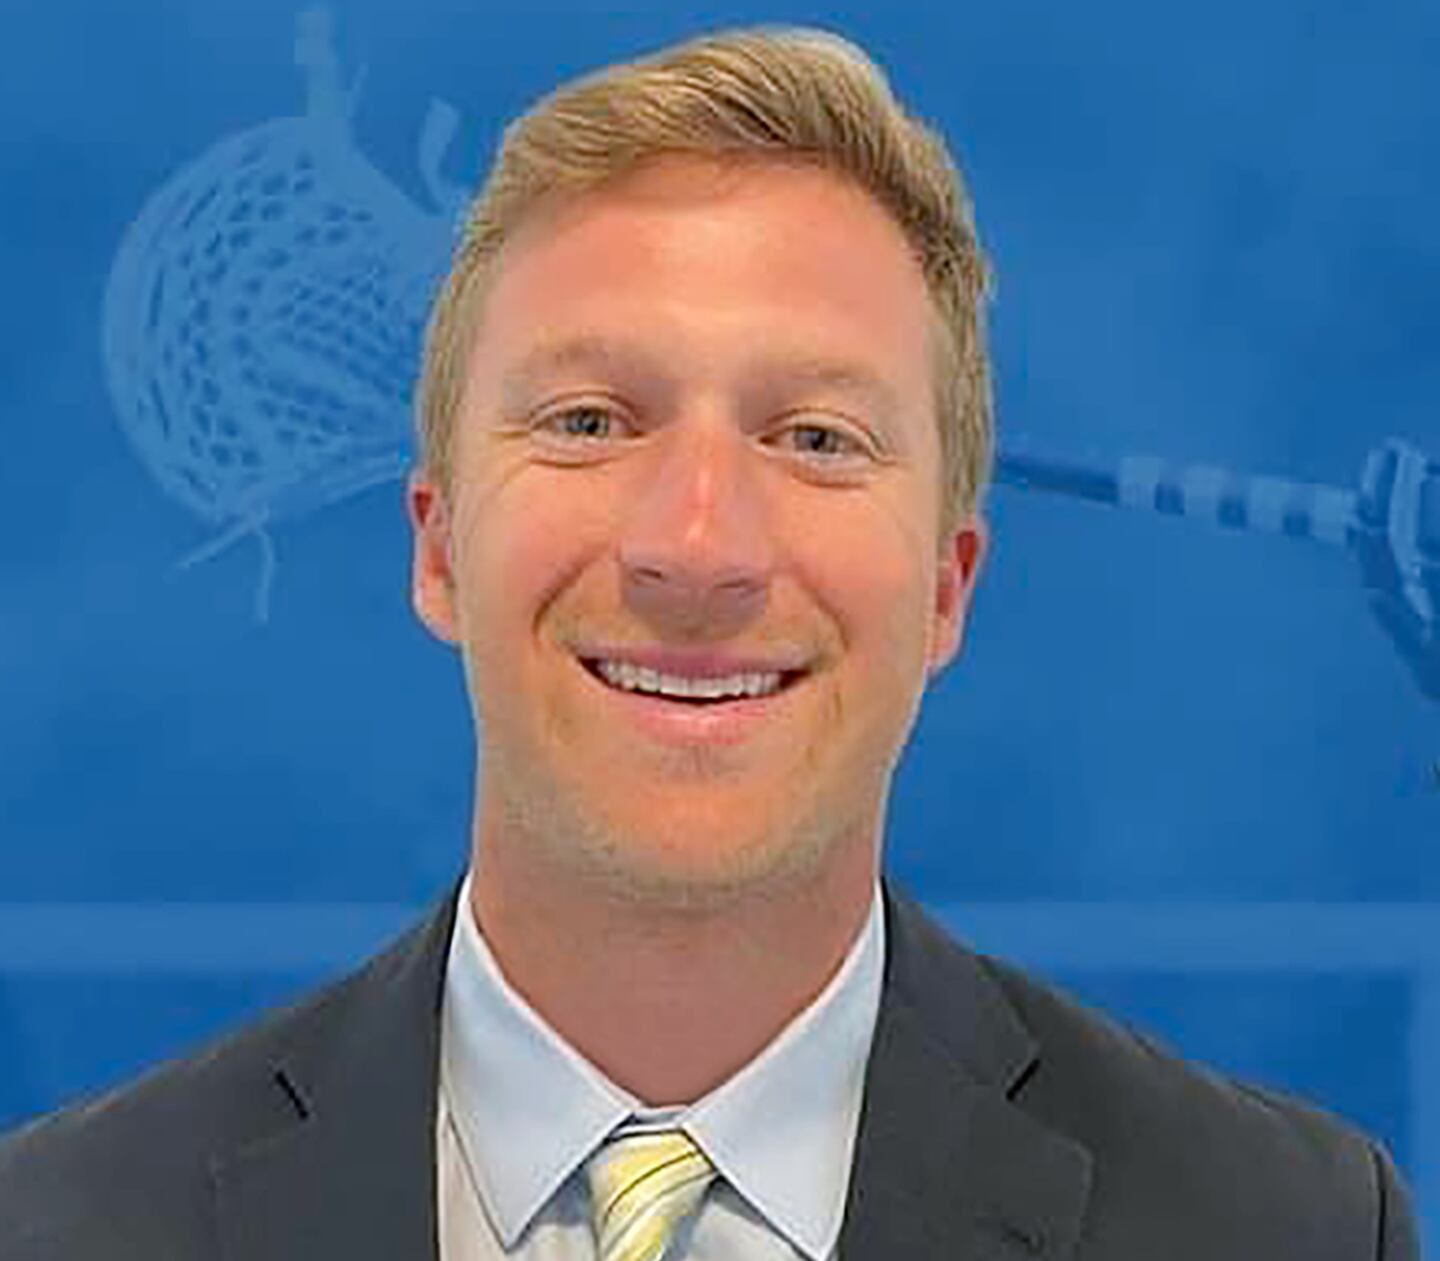 Will Haus, a former 1st-Team All-American and a two-time NCAA champion at Duke University, as well as a World Champion with Team USA, has been named the new head lacrosse coach at Loyola Blakefield, succeeding Gene Ubriaco, who announced prior to the 2023 campaign that he would be stepping down at season's end.